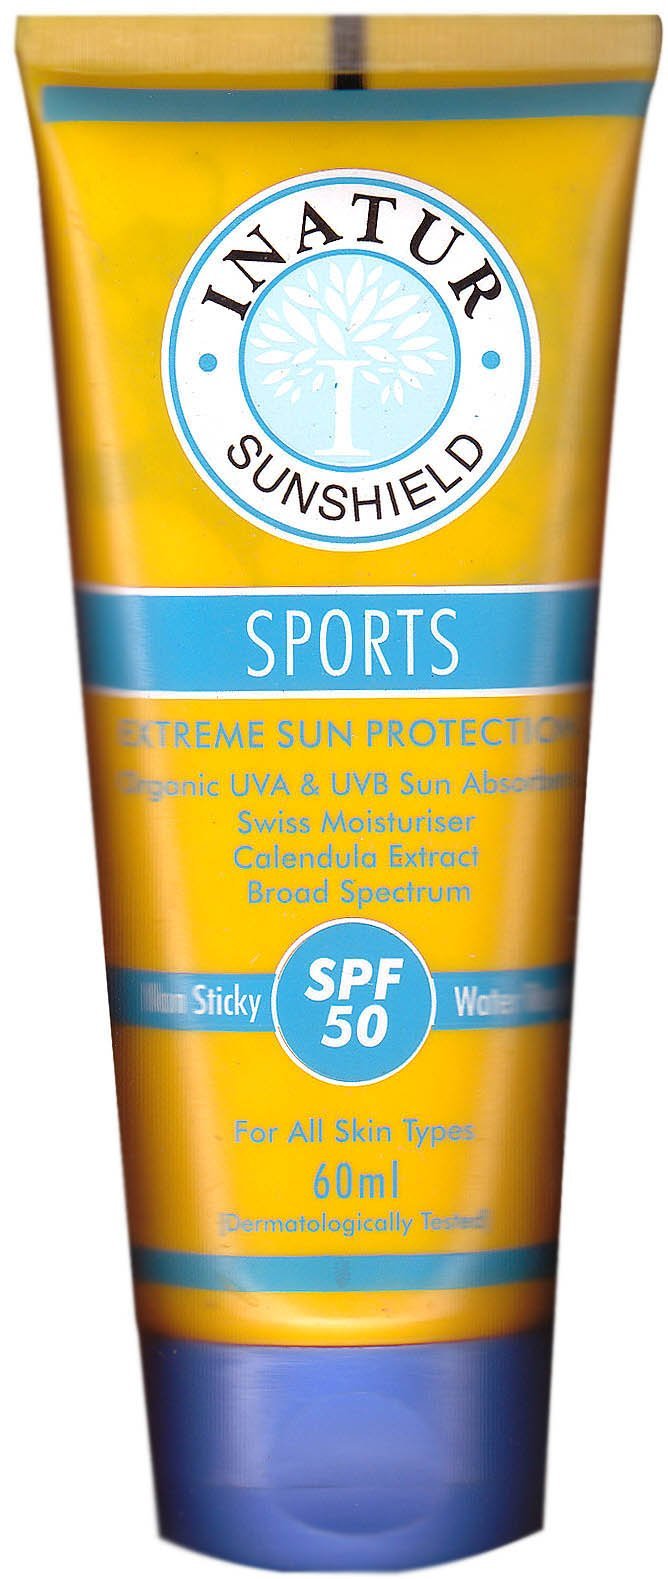 Sports Extreme Sun Protection - book cover